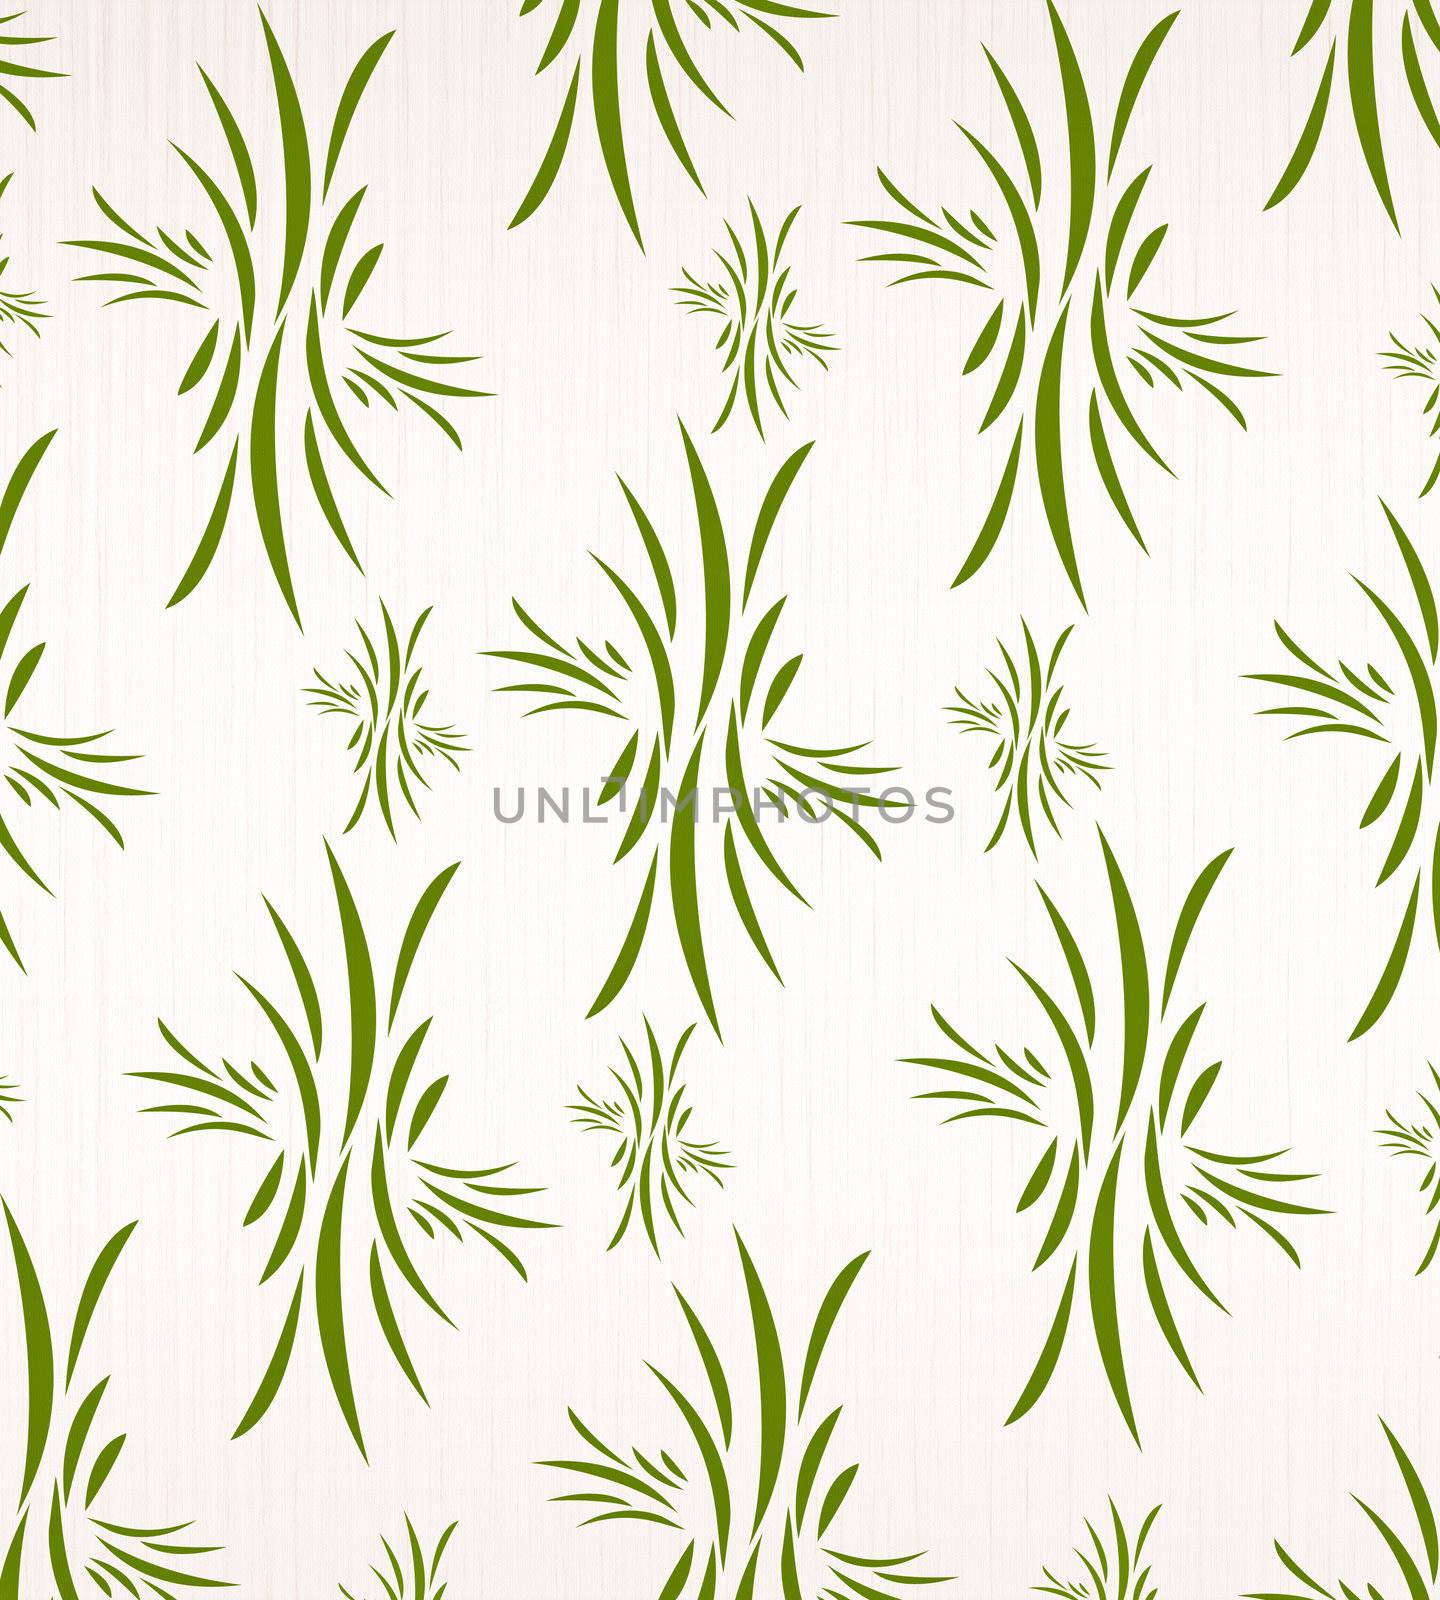 Background with grass  on white fabric